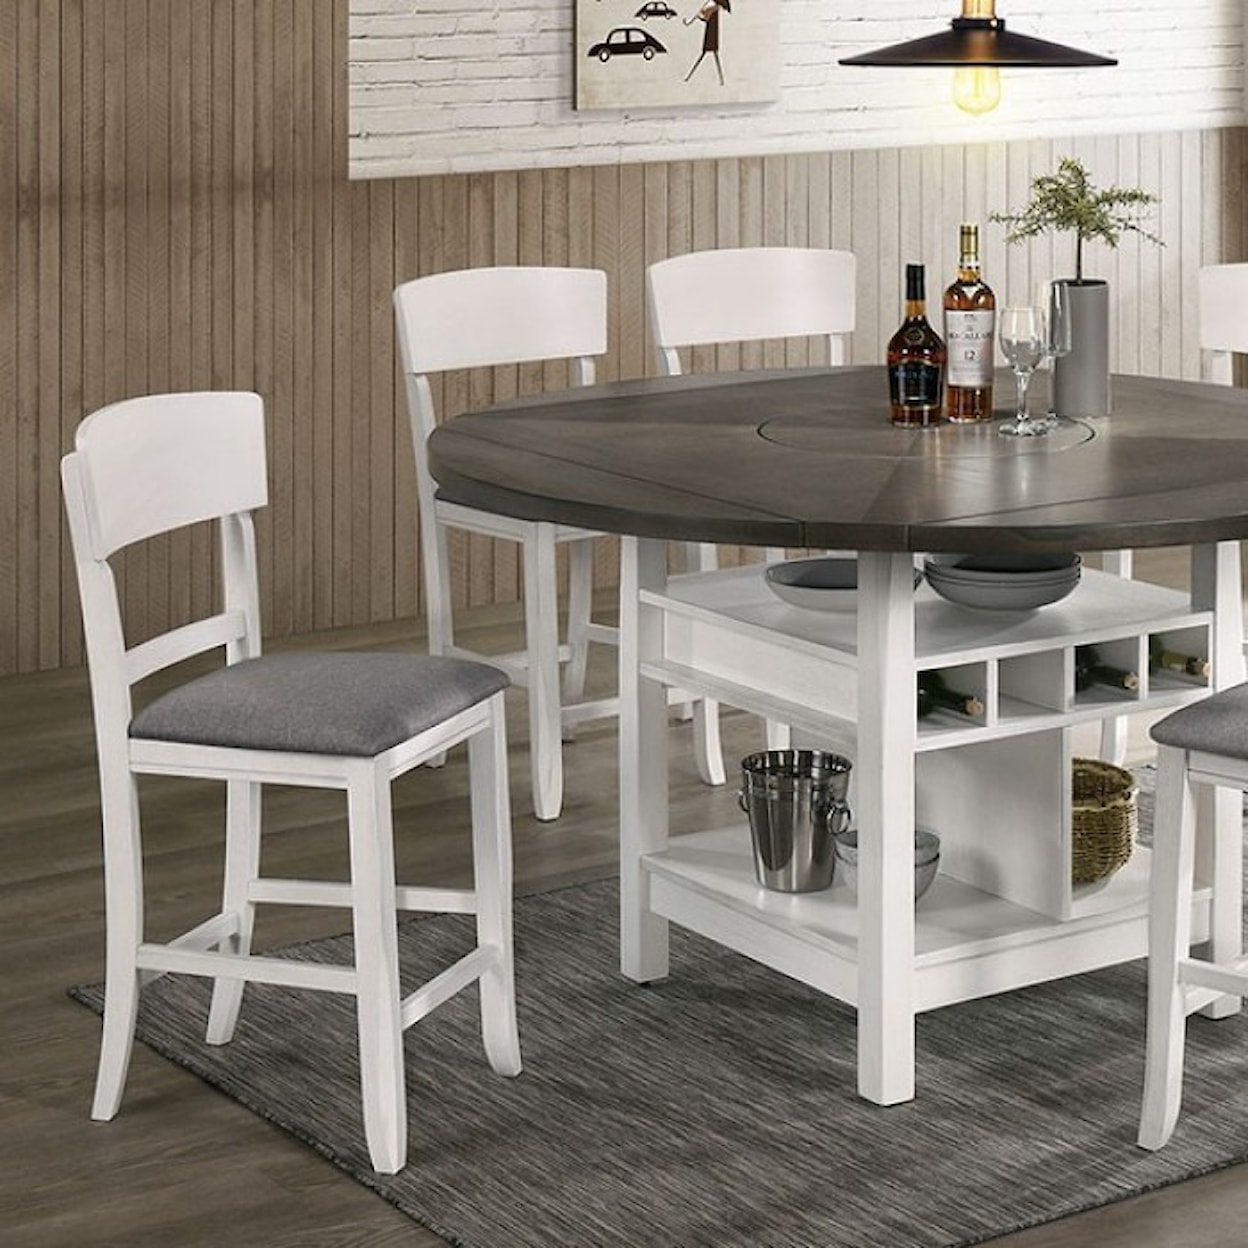 FUSA Stacie Counter Height Dining Set